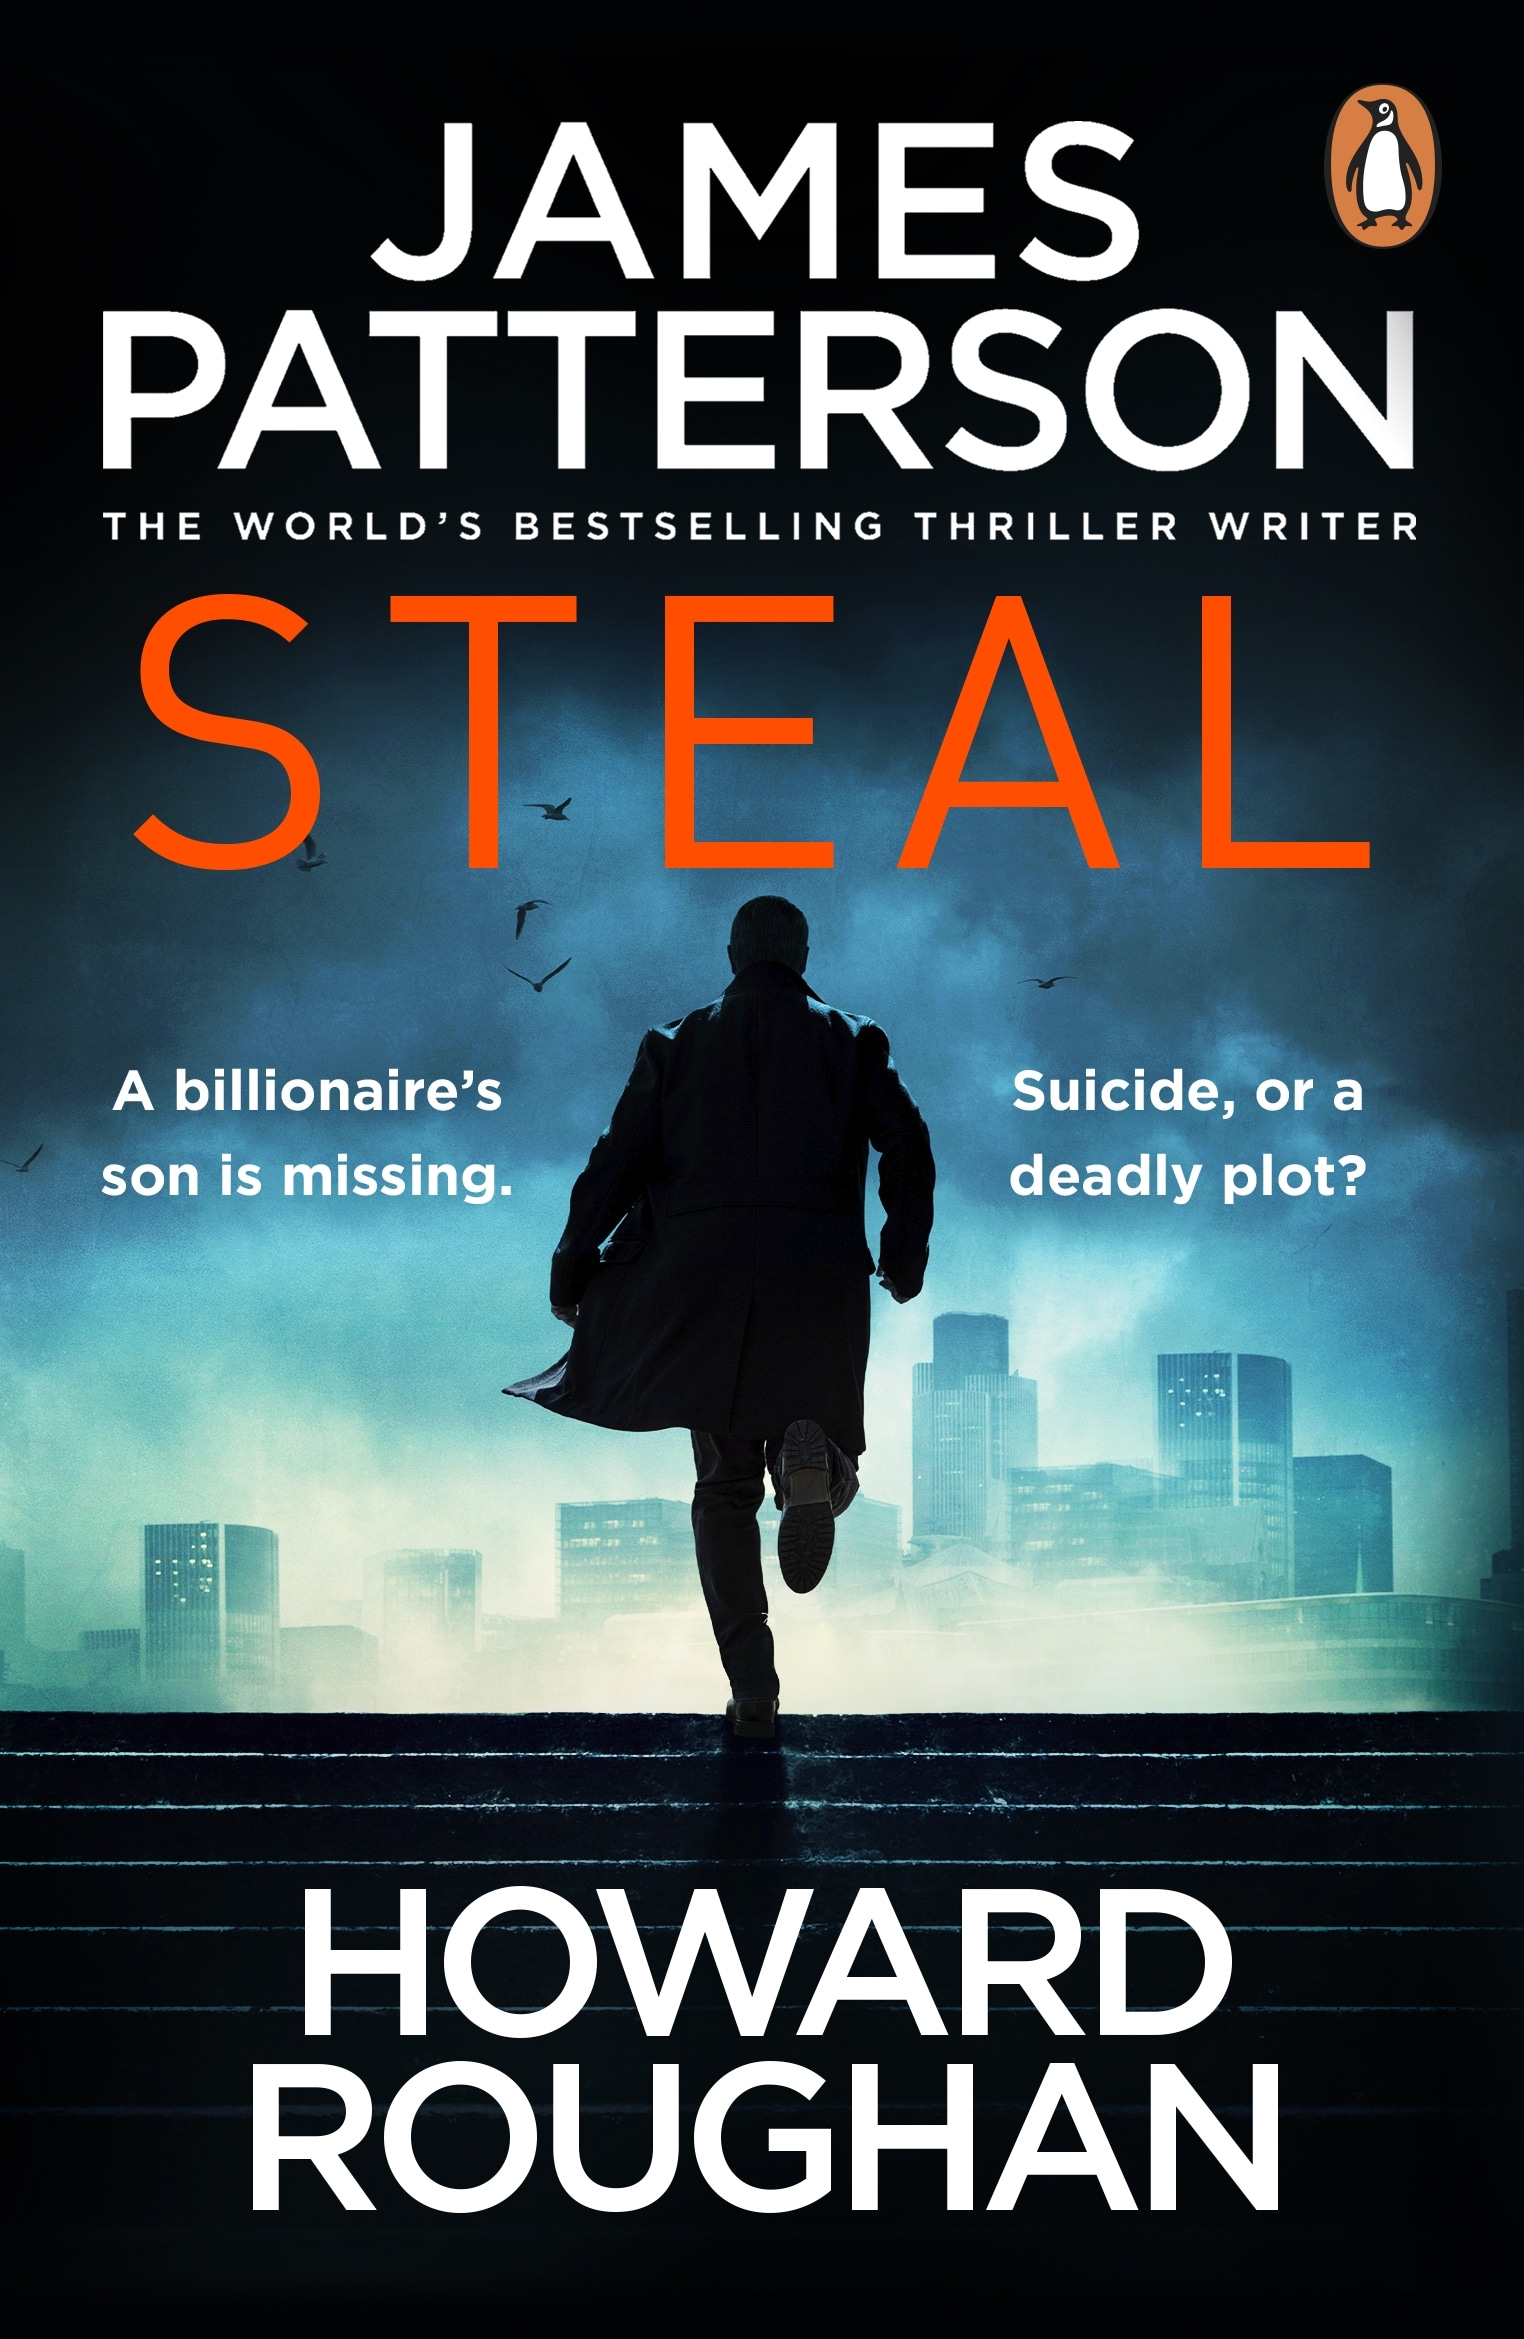 Book “Steal” by James Patterson — December 29, 2022